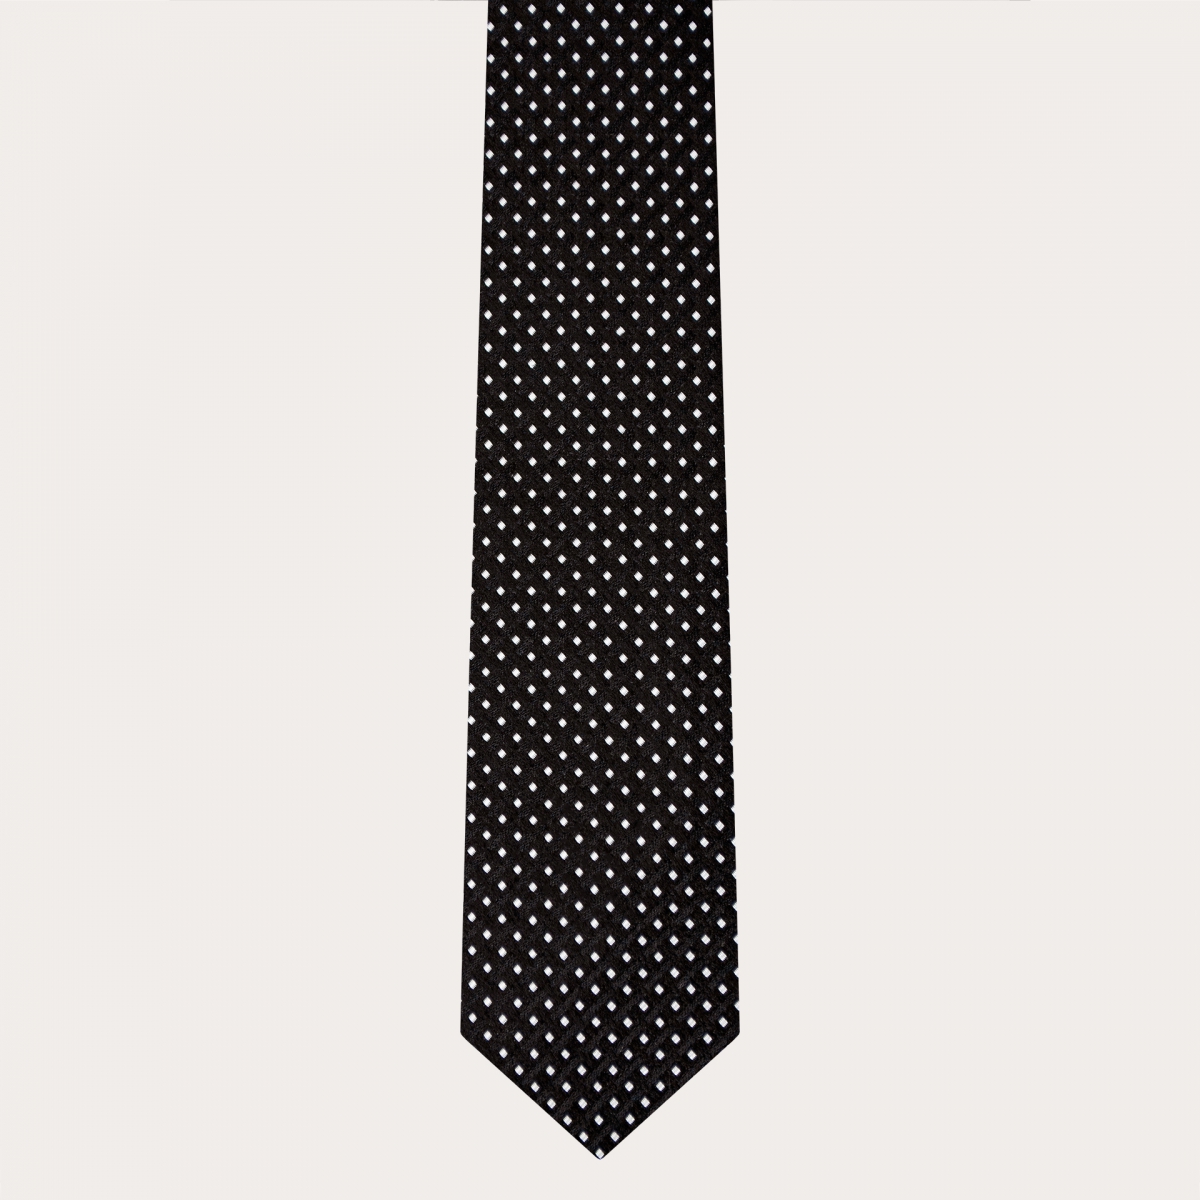 BRUCLE Dotted black silk suspenders, necktie and pocket square set